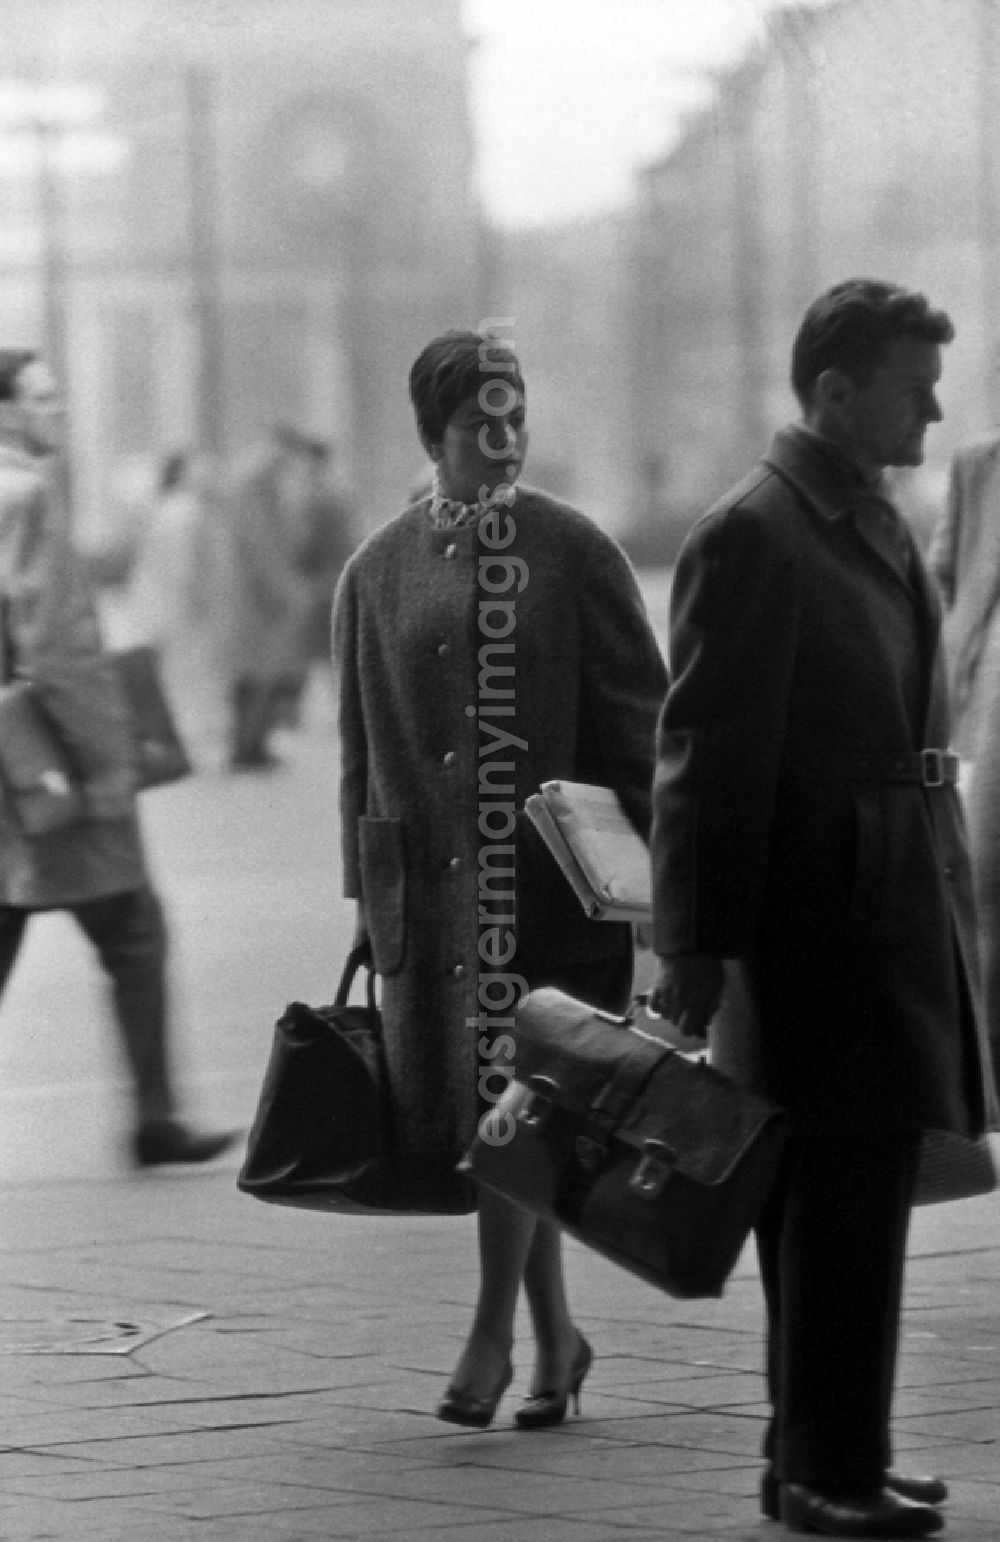 GDR picture archive: Berlin - Woman shopping through the city in East Berlin in the area of the former GDR, German Democratic Republic